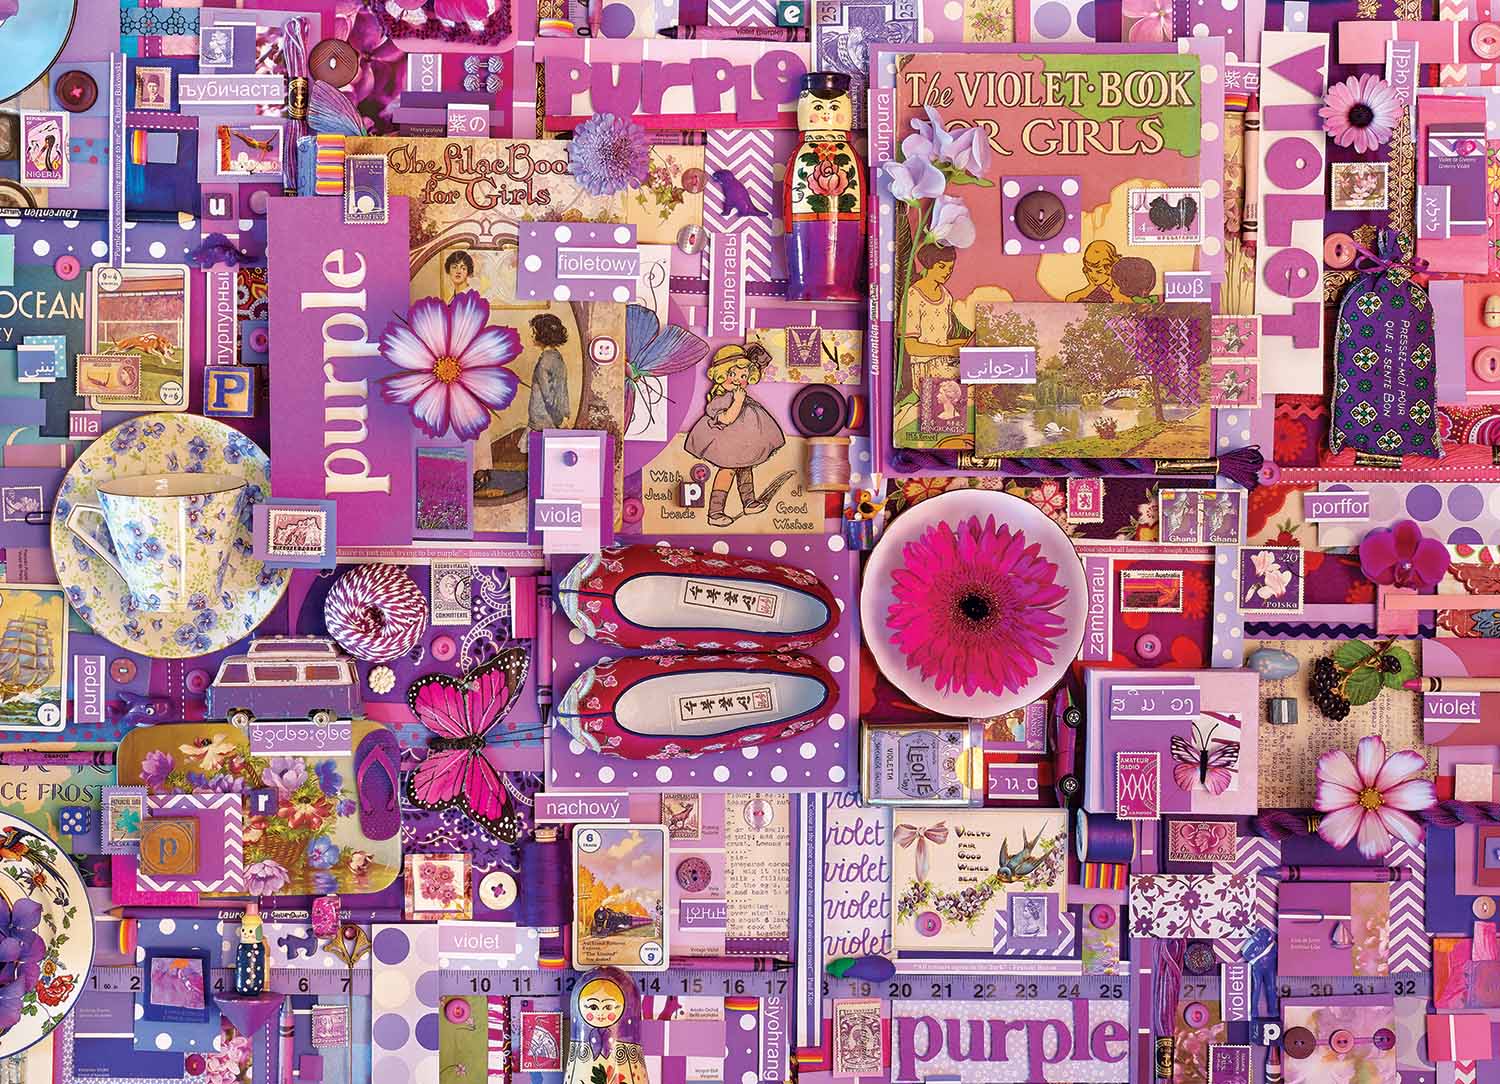 DUPE Purple Collage Jigsaw Puzzle